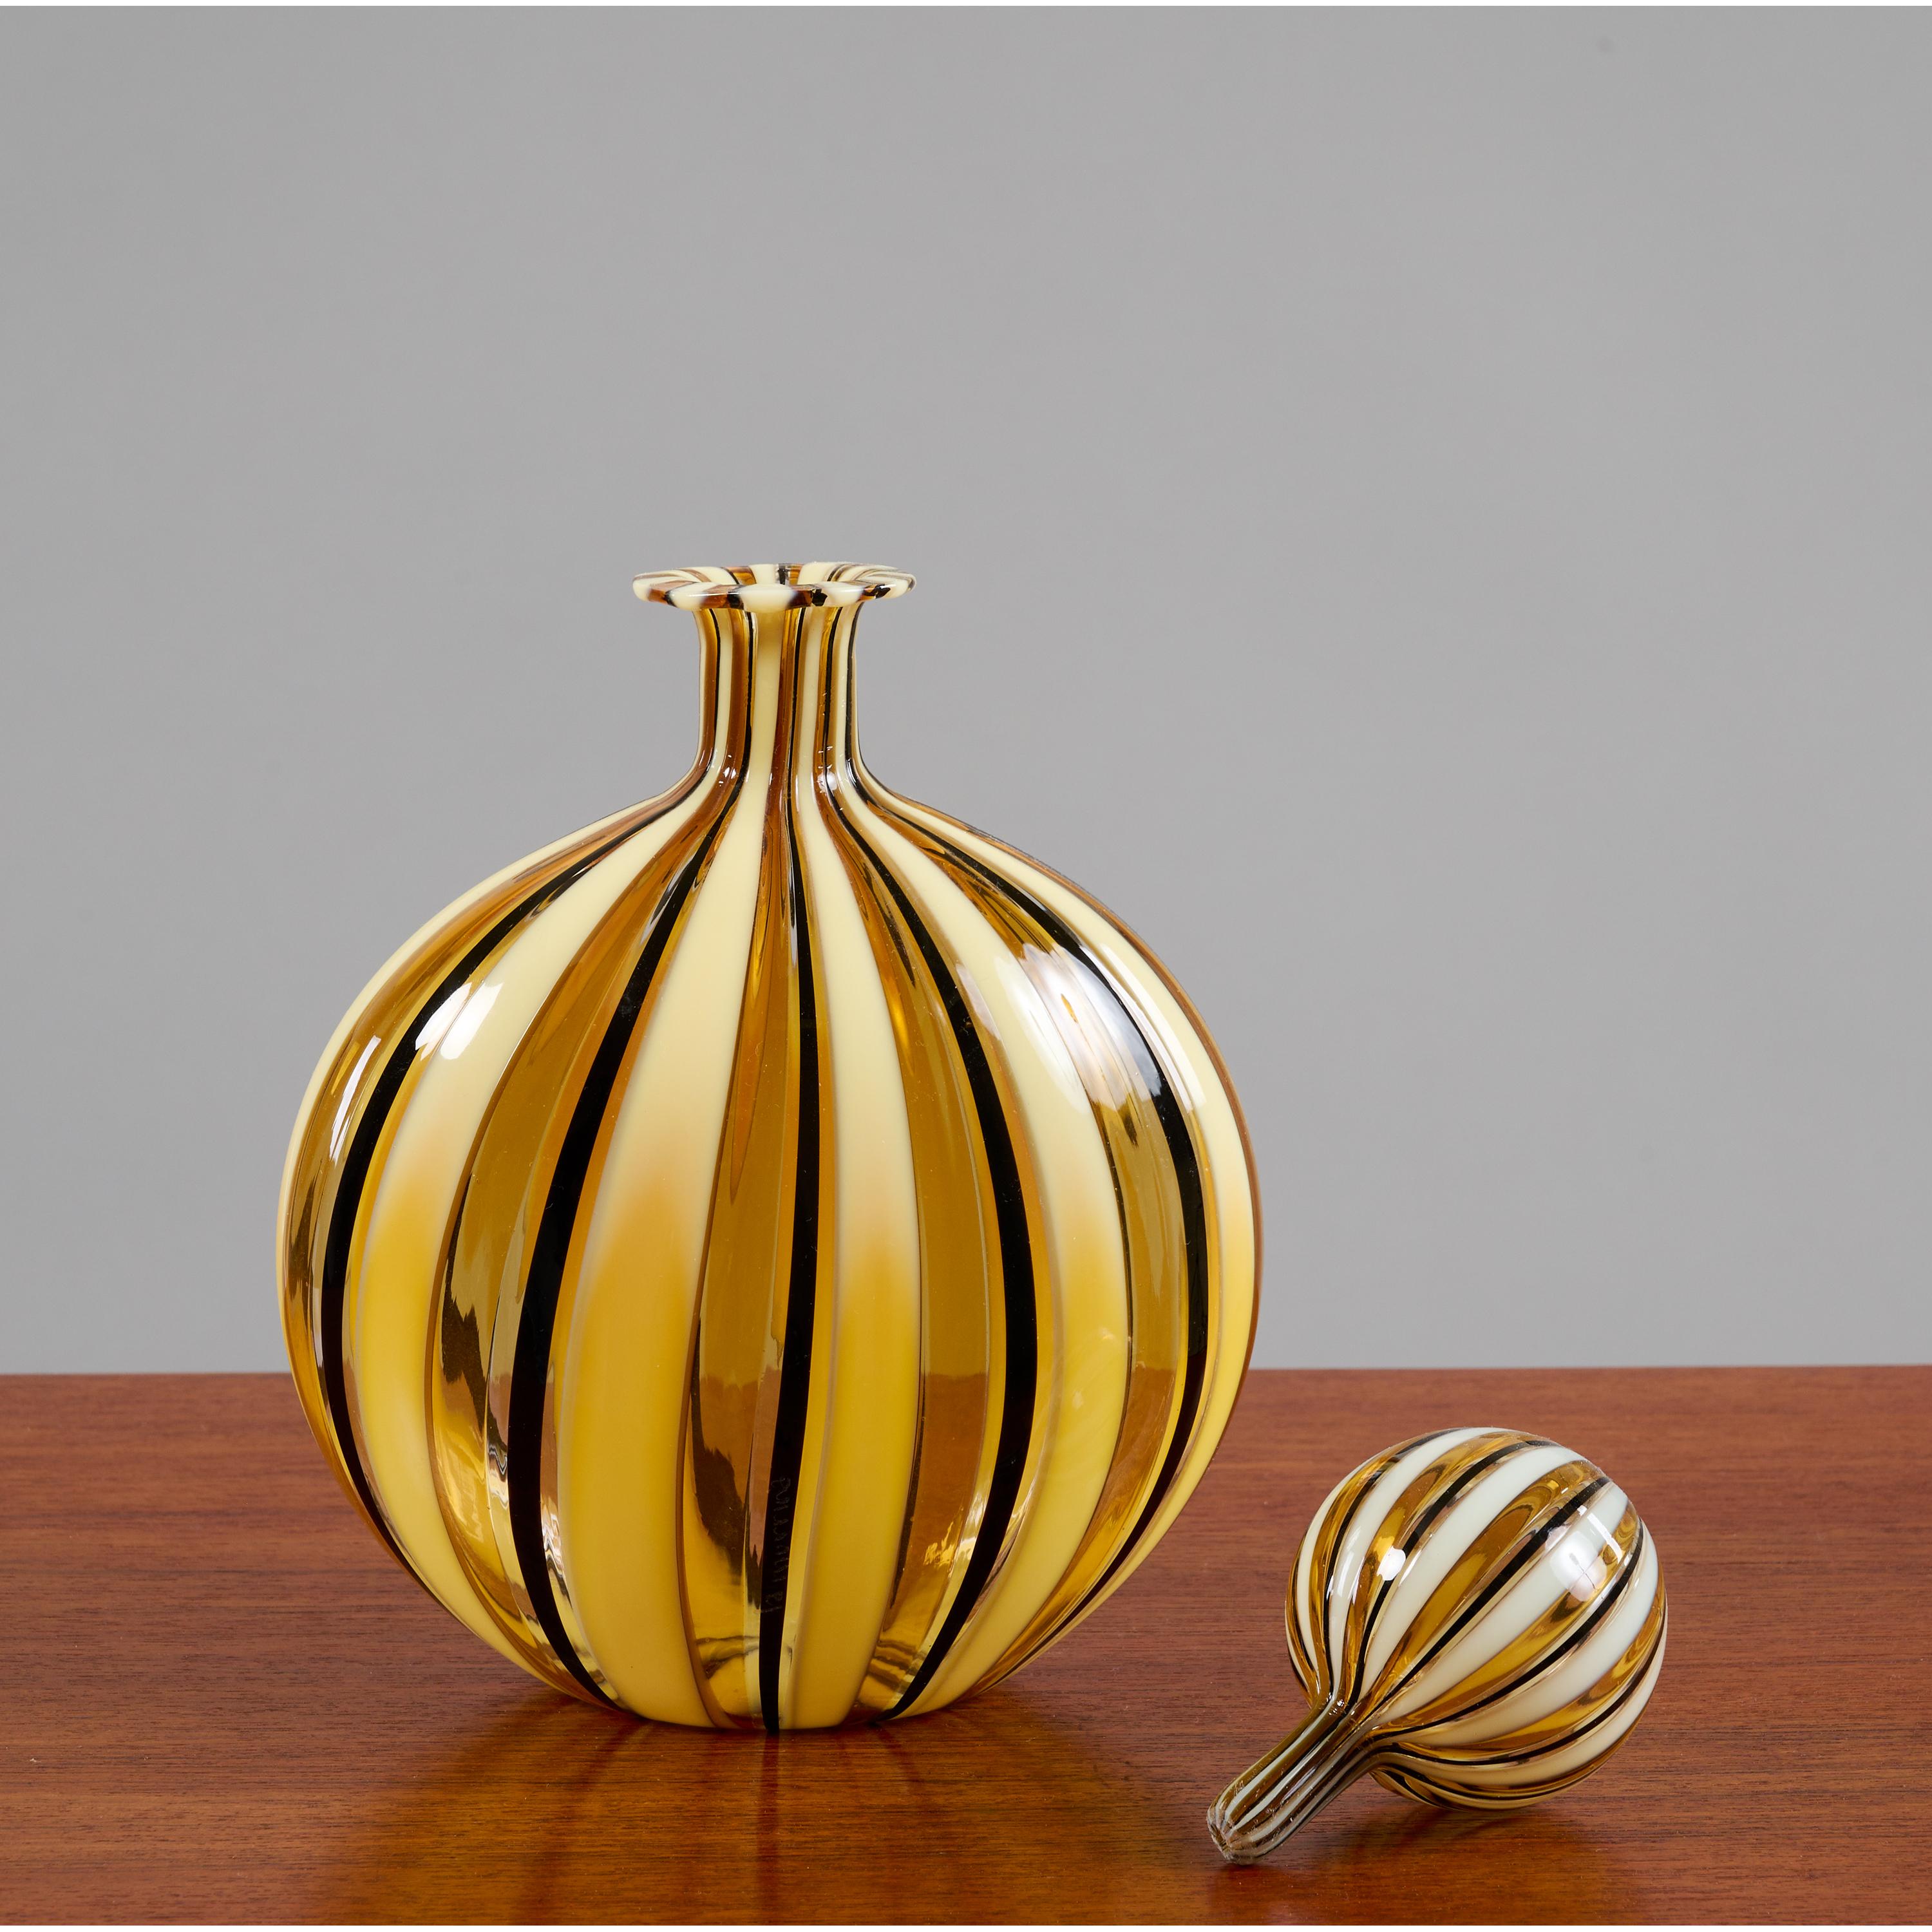 Gio Ponti (1891 - 1979), attributed to 

A graceful hand-blown Murano glass bottle attributed to Gio Ponti, with lively filigrana in alternating clear and opaque stripes of yellow, black, and white. The vase's frontally rounded shape tapers on the